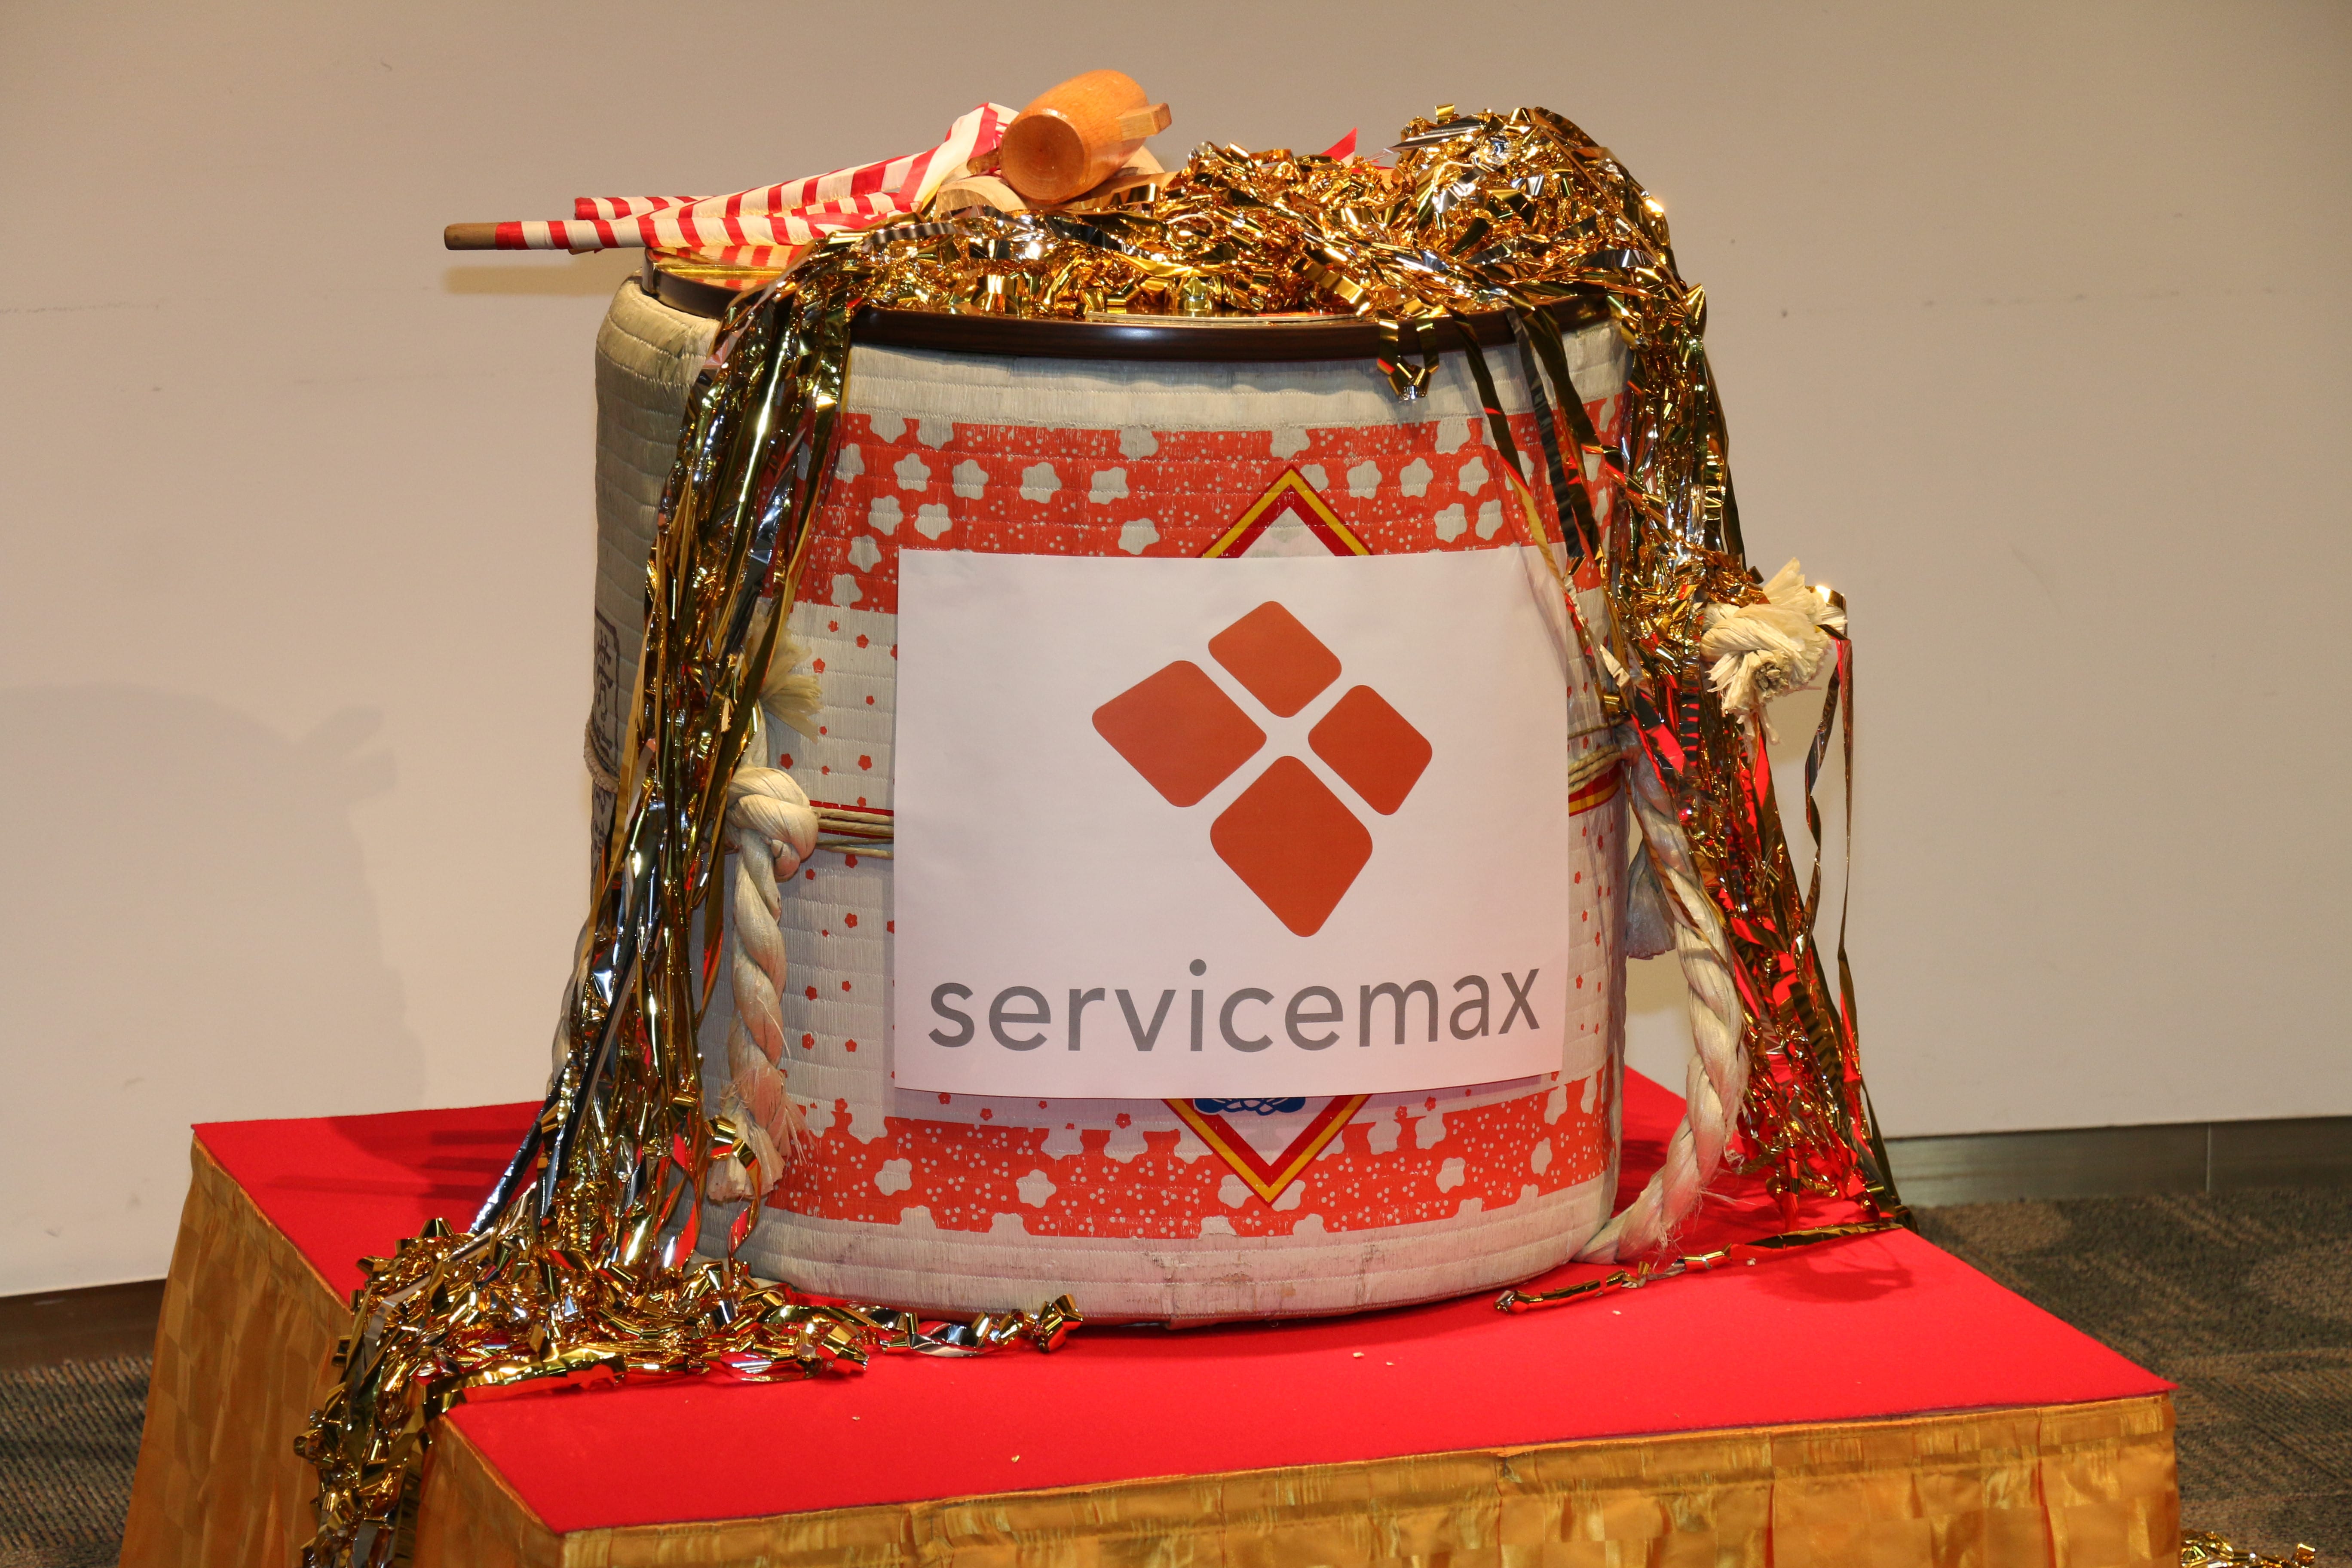 ServiceMax’s Launch in Japan